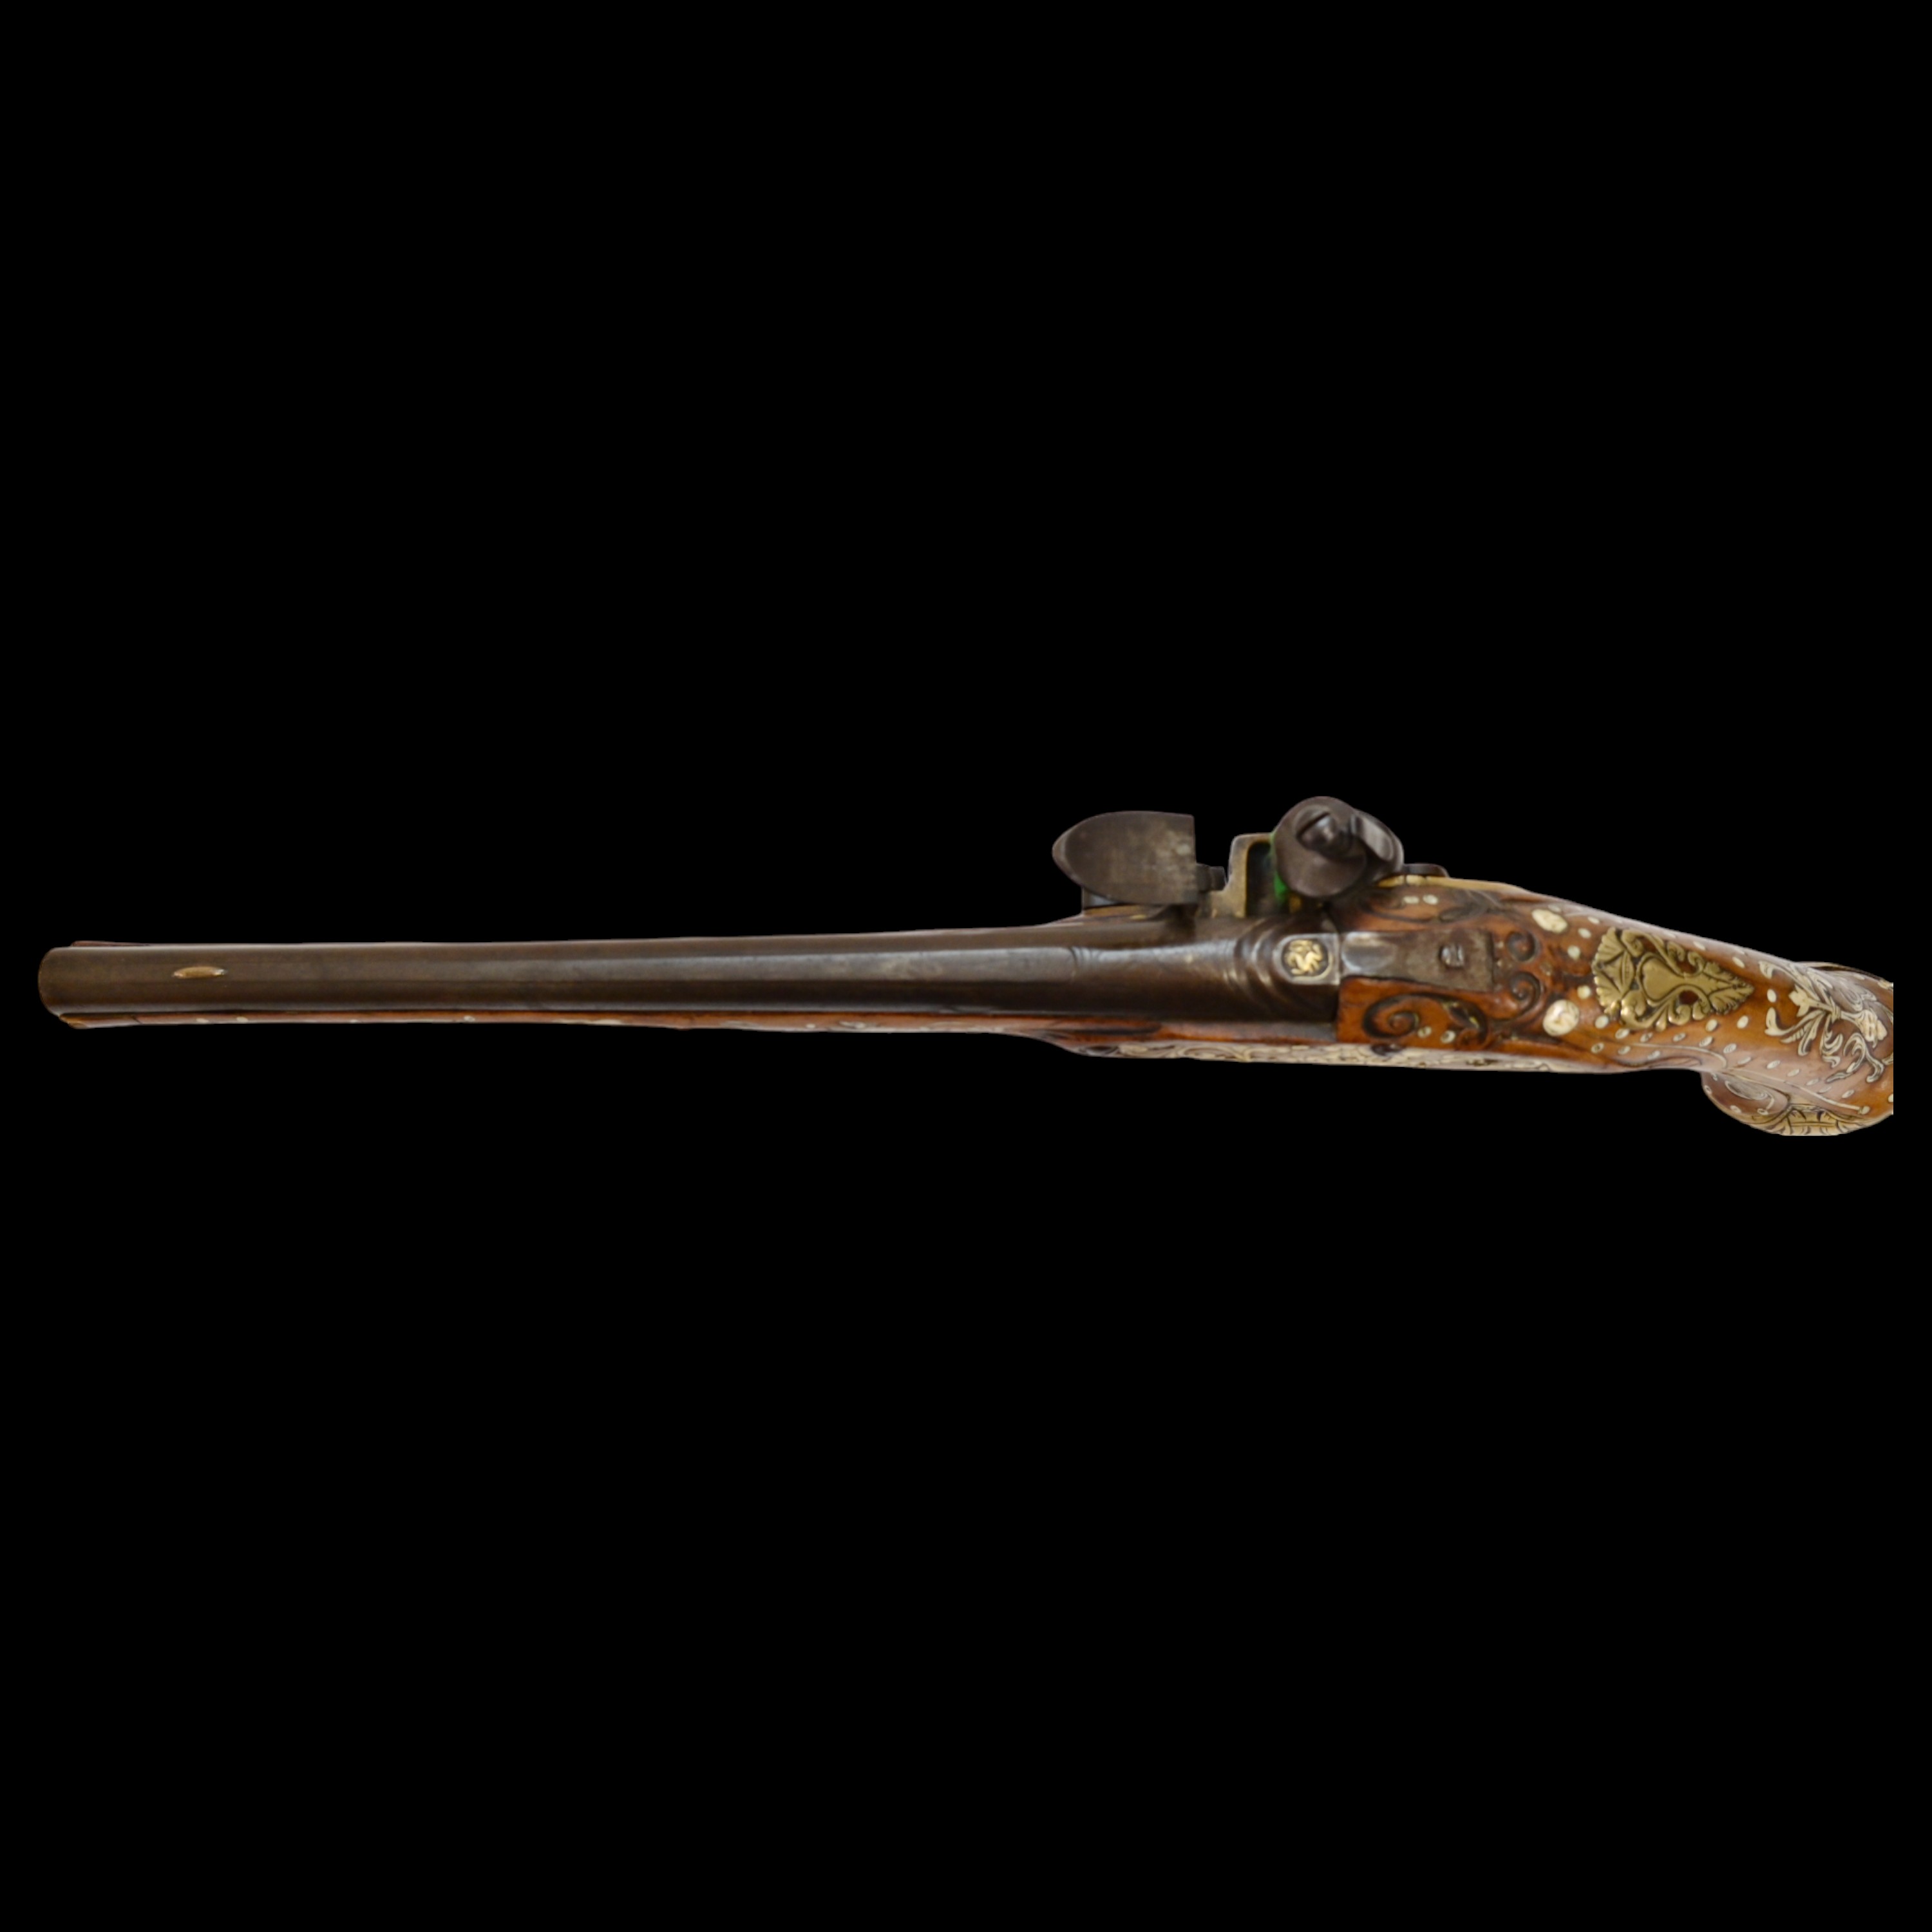 Rare, Richly decorated with inlay, flintlock pistol, Germany, last quarter of the 17th century. - Image 10 of 12